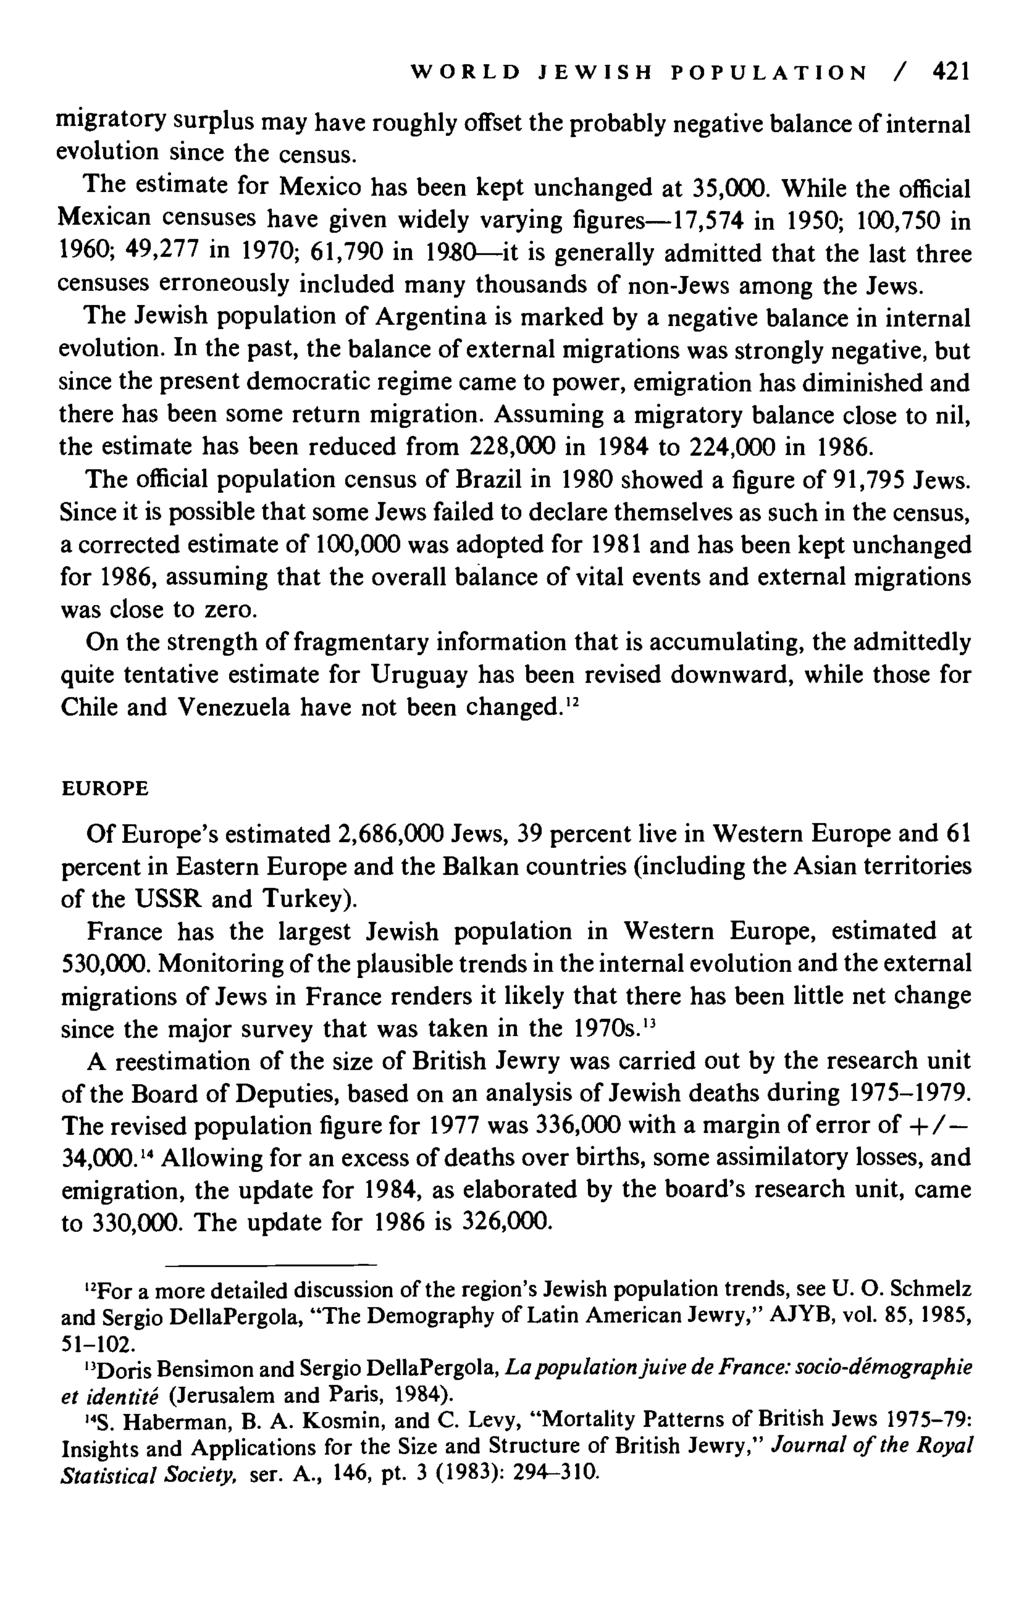 WORL JEWISH POPULATION / 421 migratory surplus may have roughly offset the probably negative balance of internal evolution since the census. The estimate for Mexico has been kept unchanged at 35,000.